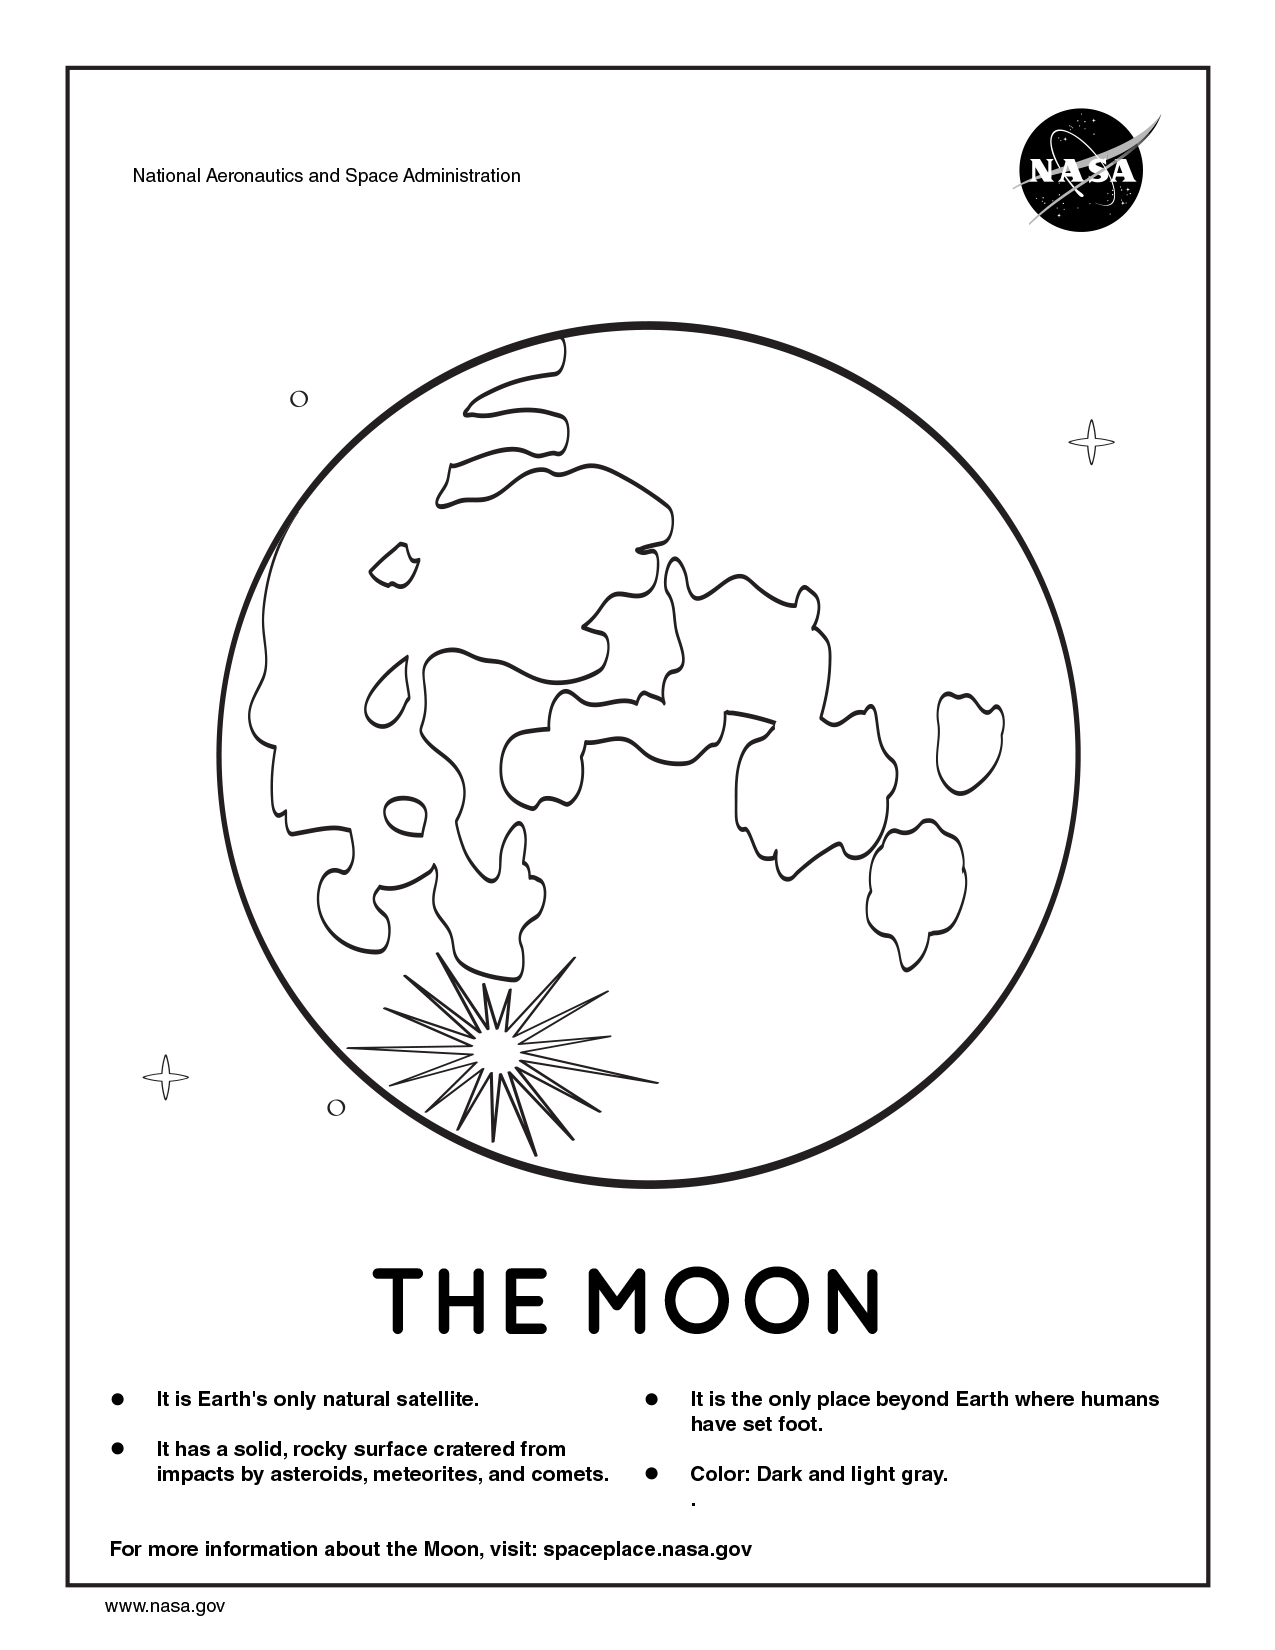 Coloring page for the Moon.